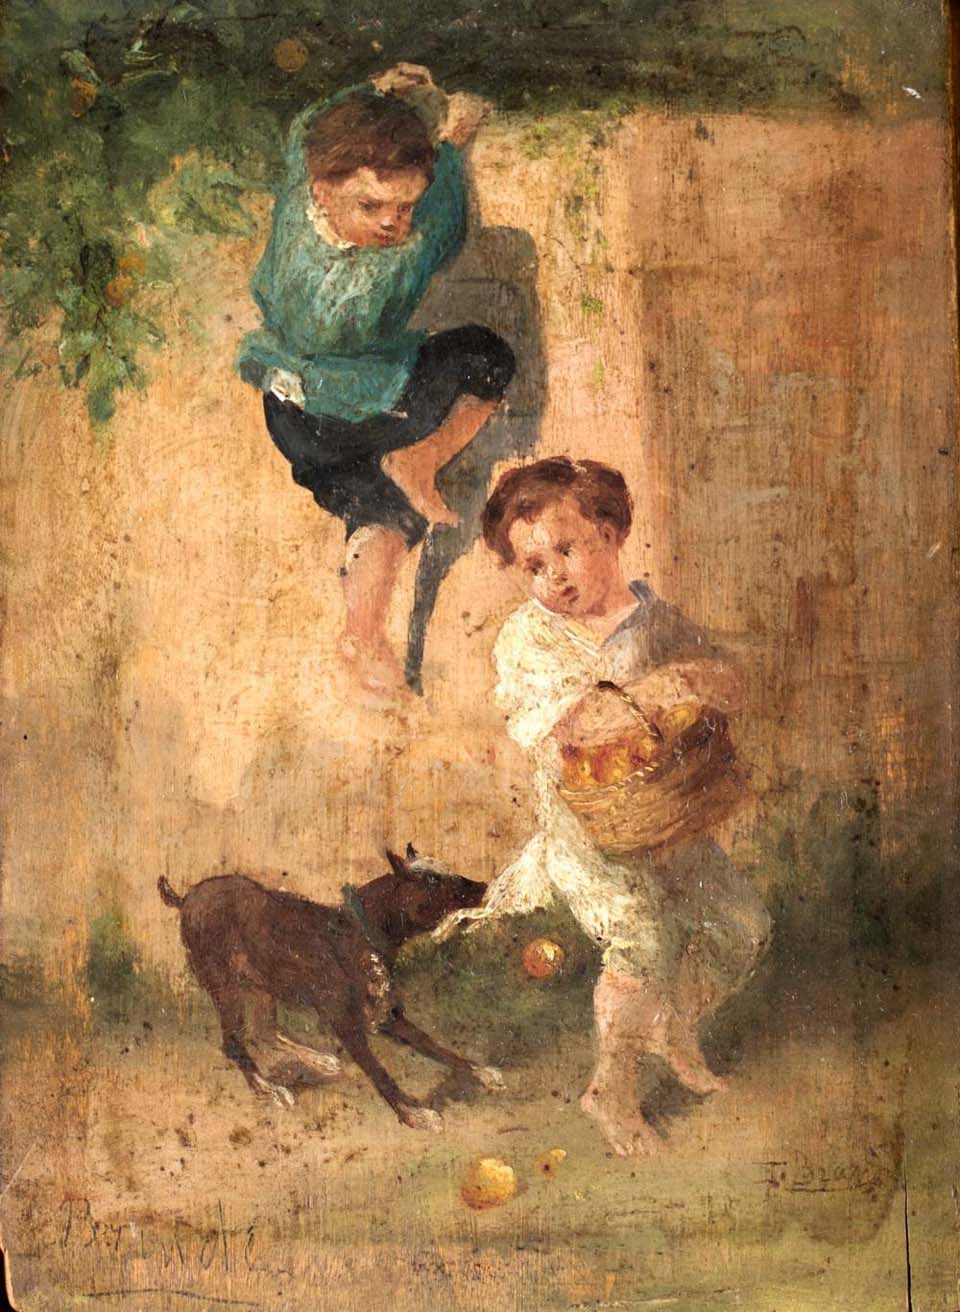 The apple thieves